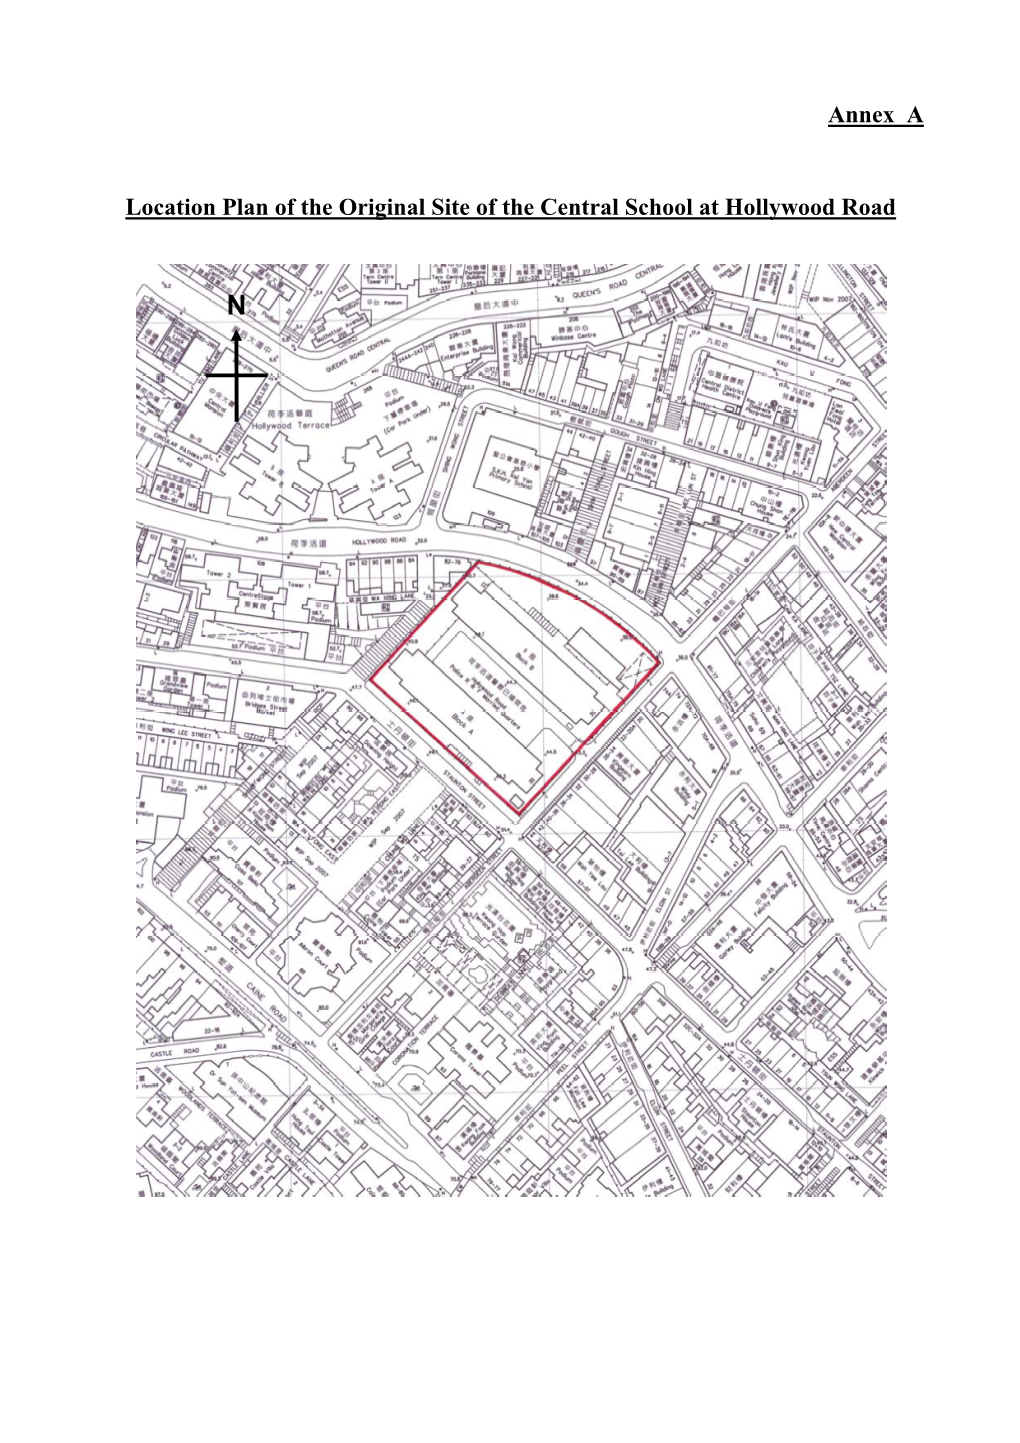 Annex a Location Plan of the Original Site of the Central School At